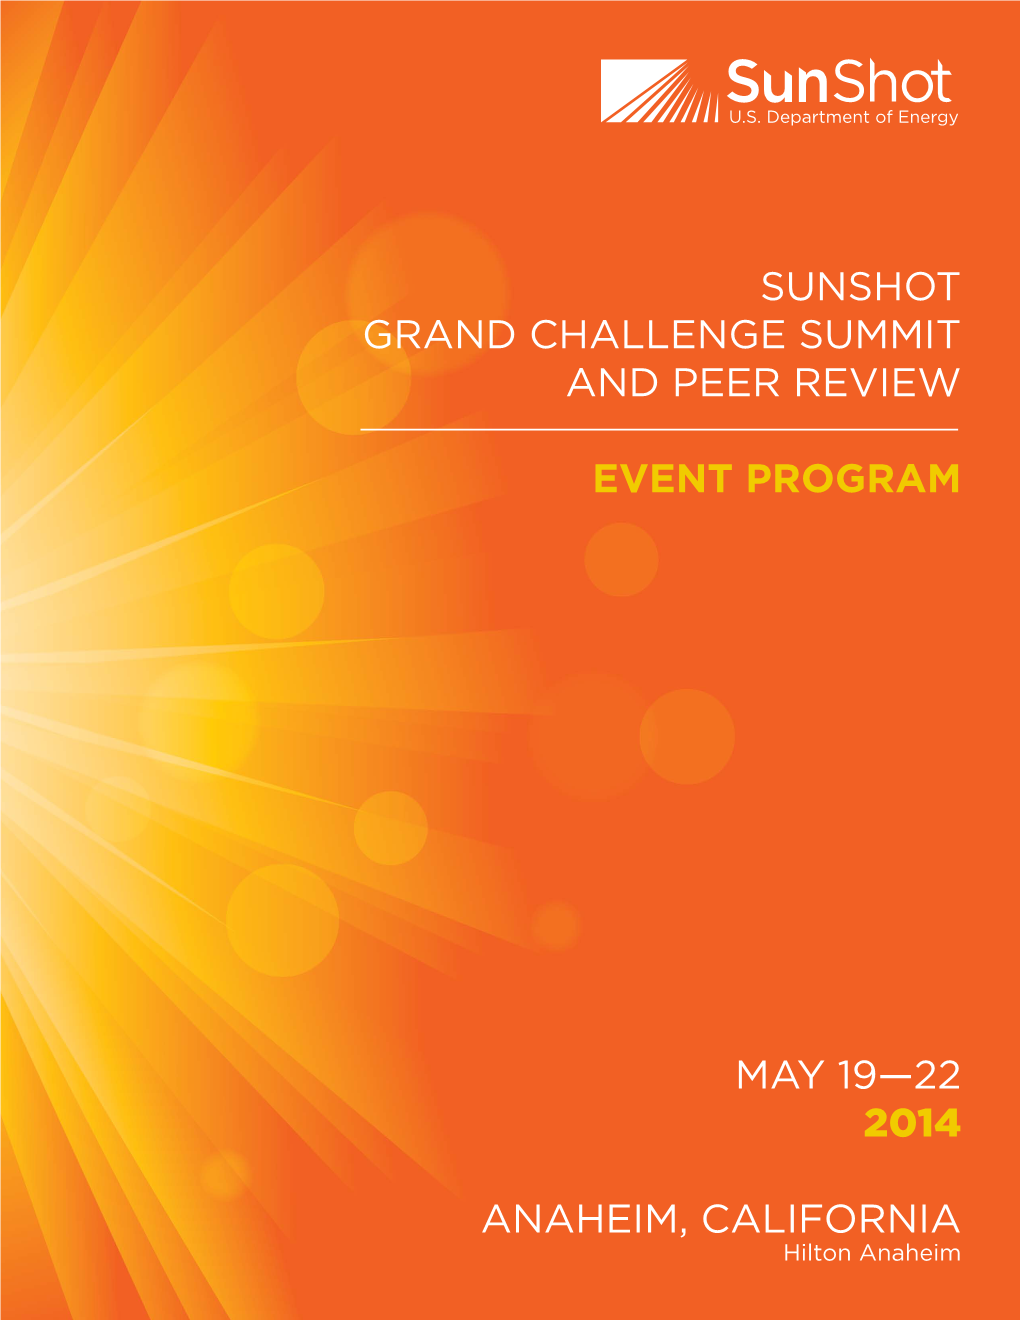 Sunshot Grand Challenge Summit and Peer Review